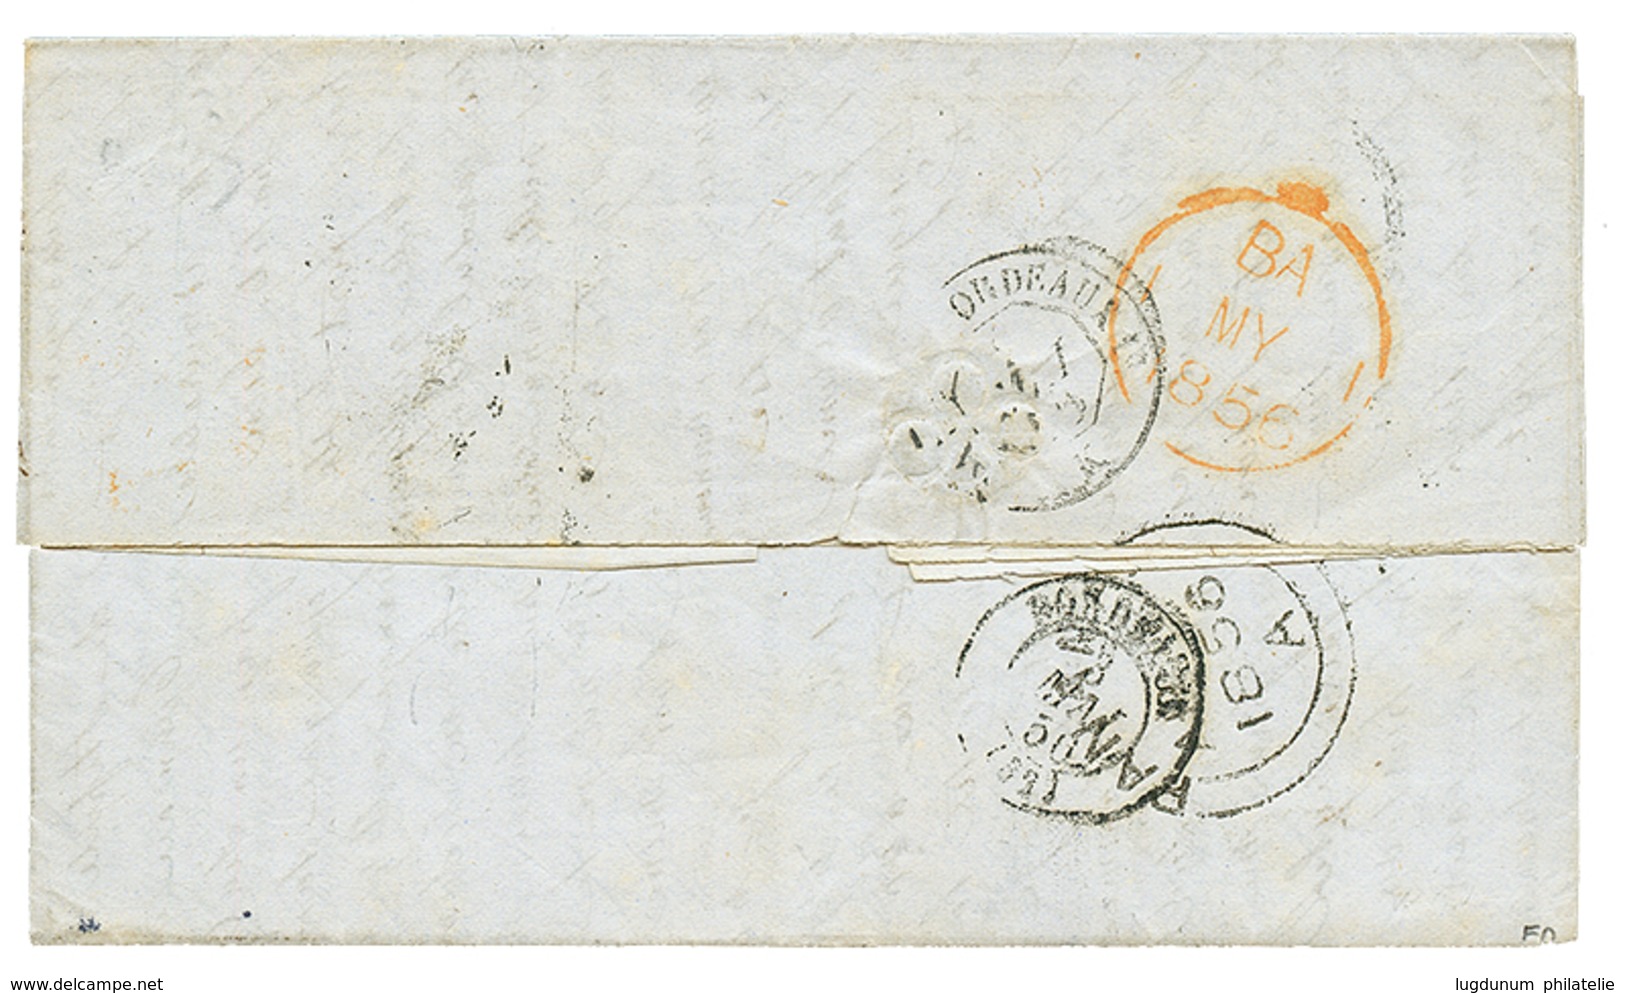 1410 PANAMA : 1856 Rare Exchange Marking COLONIES ART-18 In Red On Entire Letter Datelined "PANAMA" To FRANCE. Vvf. - Panama